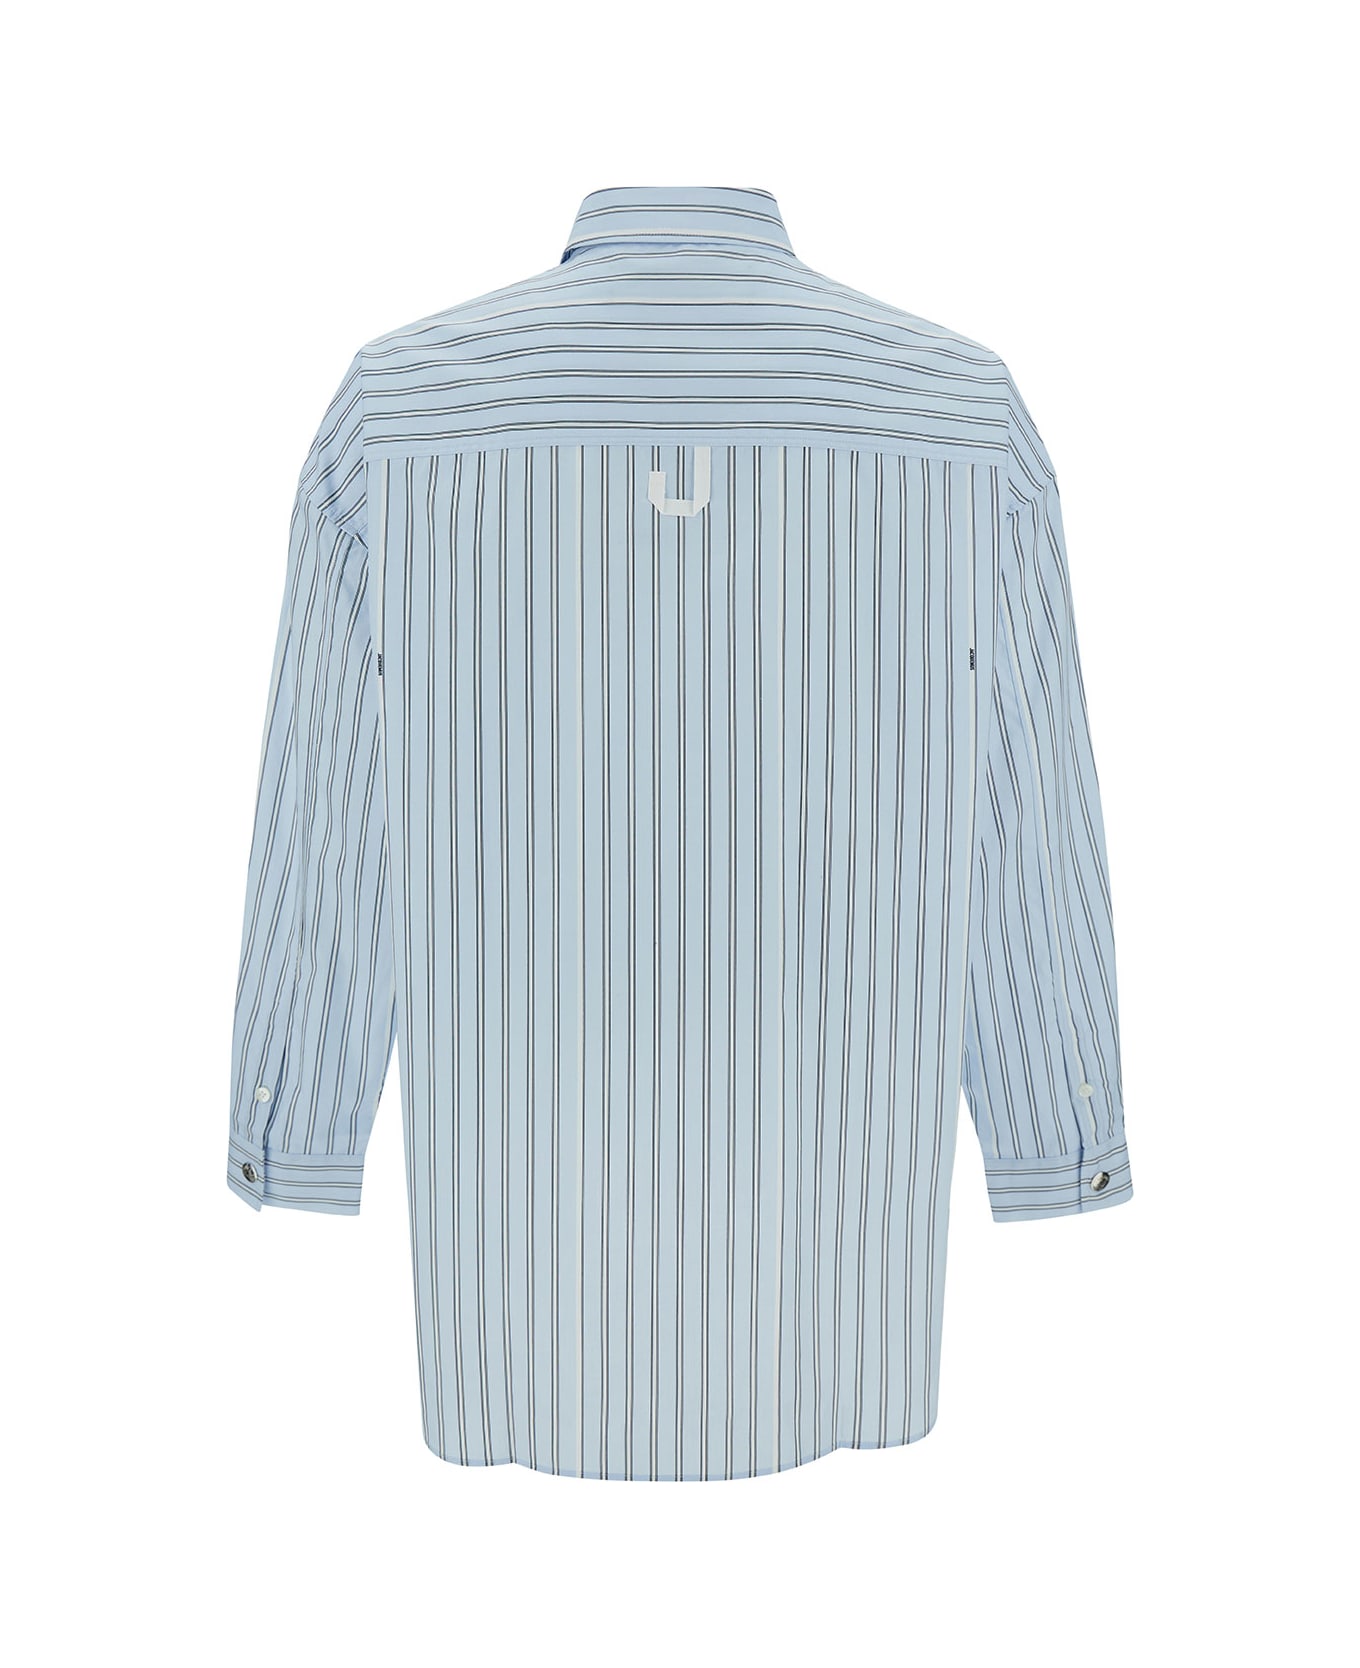 Jacquemus Light Blue Striped Shirt With Logo Lettering Detail In Cotton Man - Print blue stripe